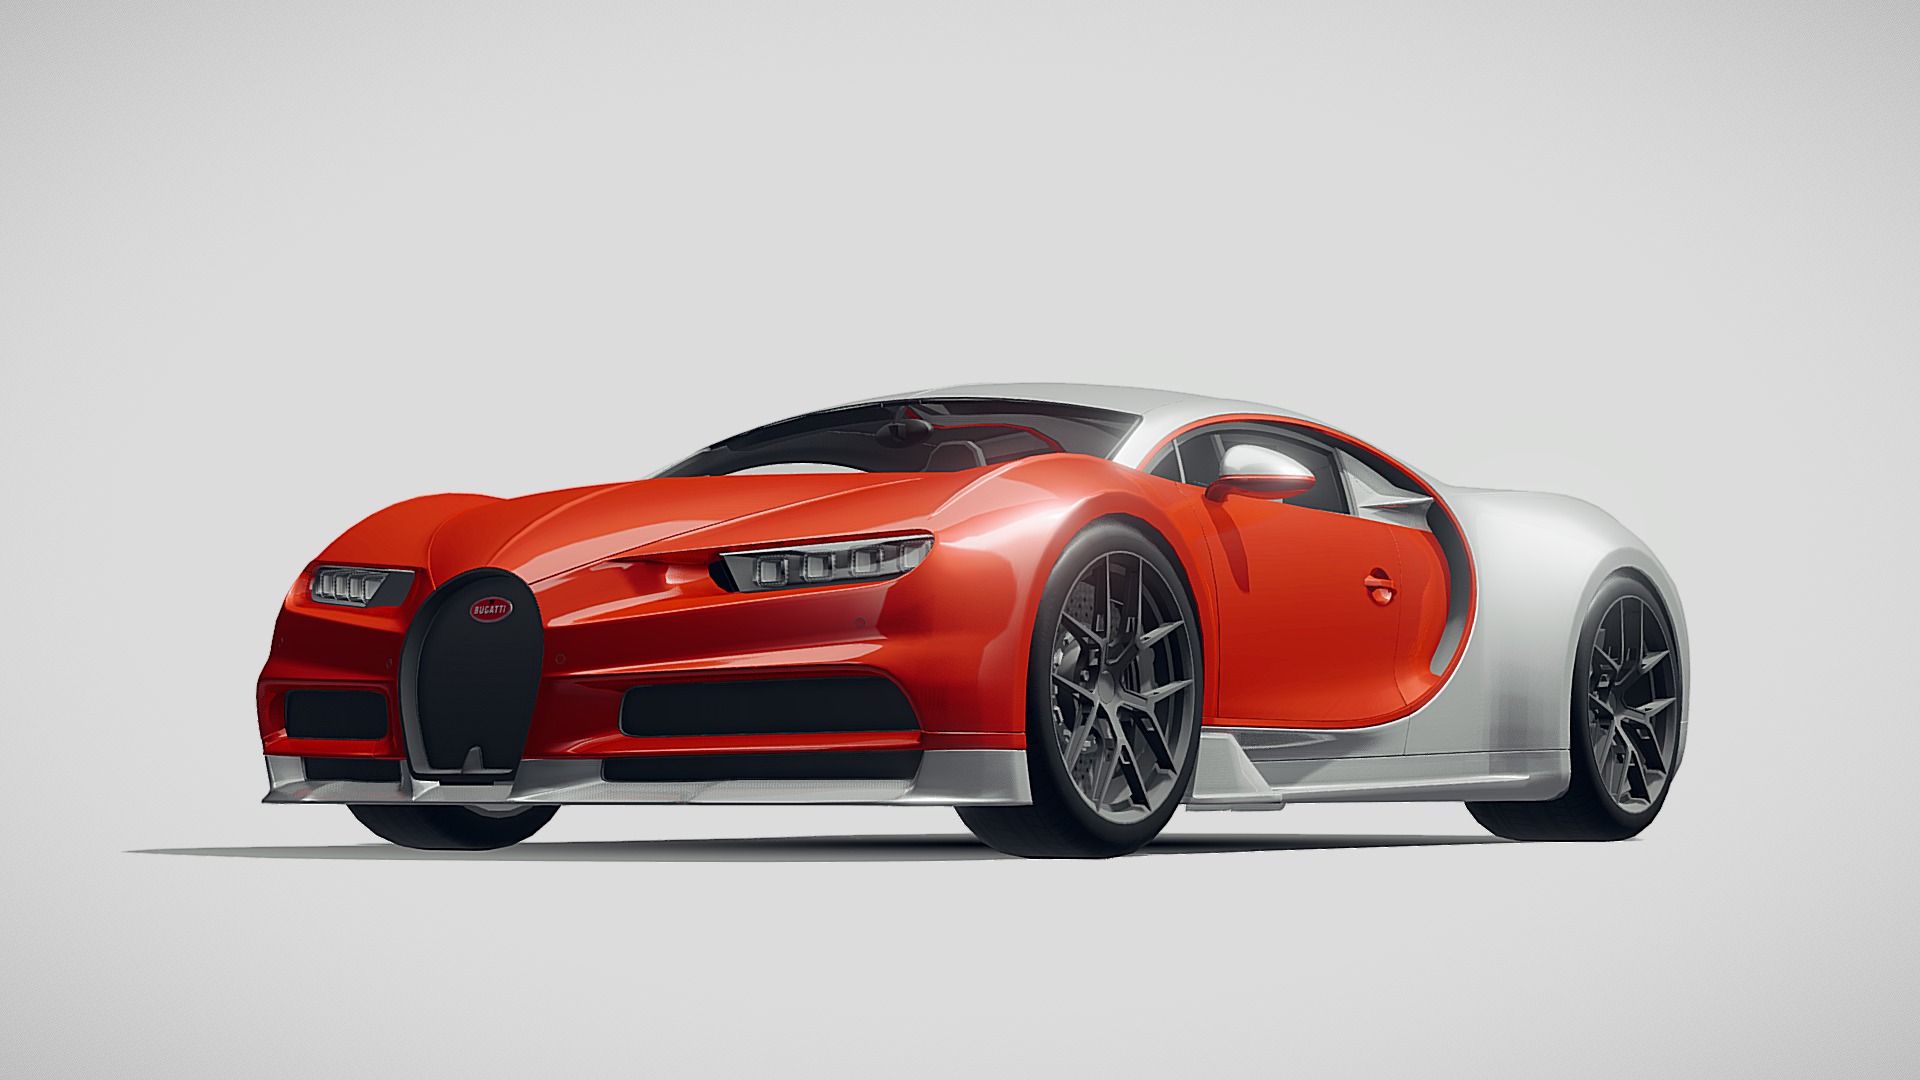 3D model LowPoly Bugatti Chiron Sport 2019 - This is a 3D model of the LowPoly Bugatti Chiron Sport 2019. The 3D model is about a red sports car.